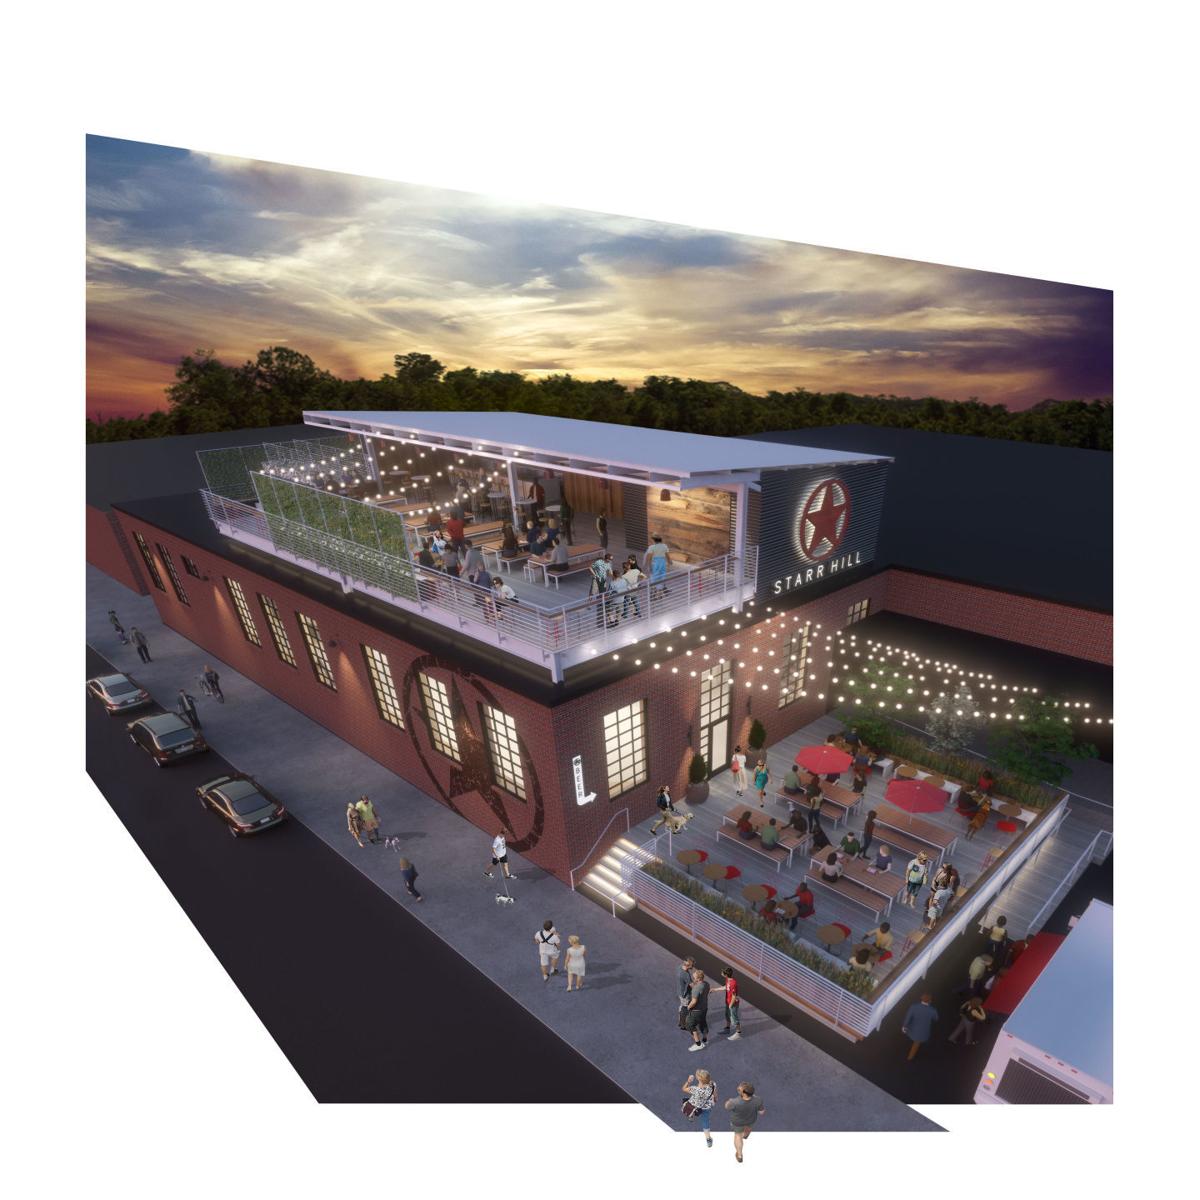 Starr Hill Brewery Opening A Beer Hall And Rooftop Bar In